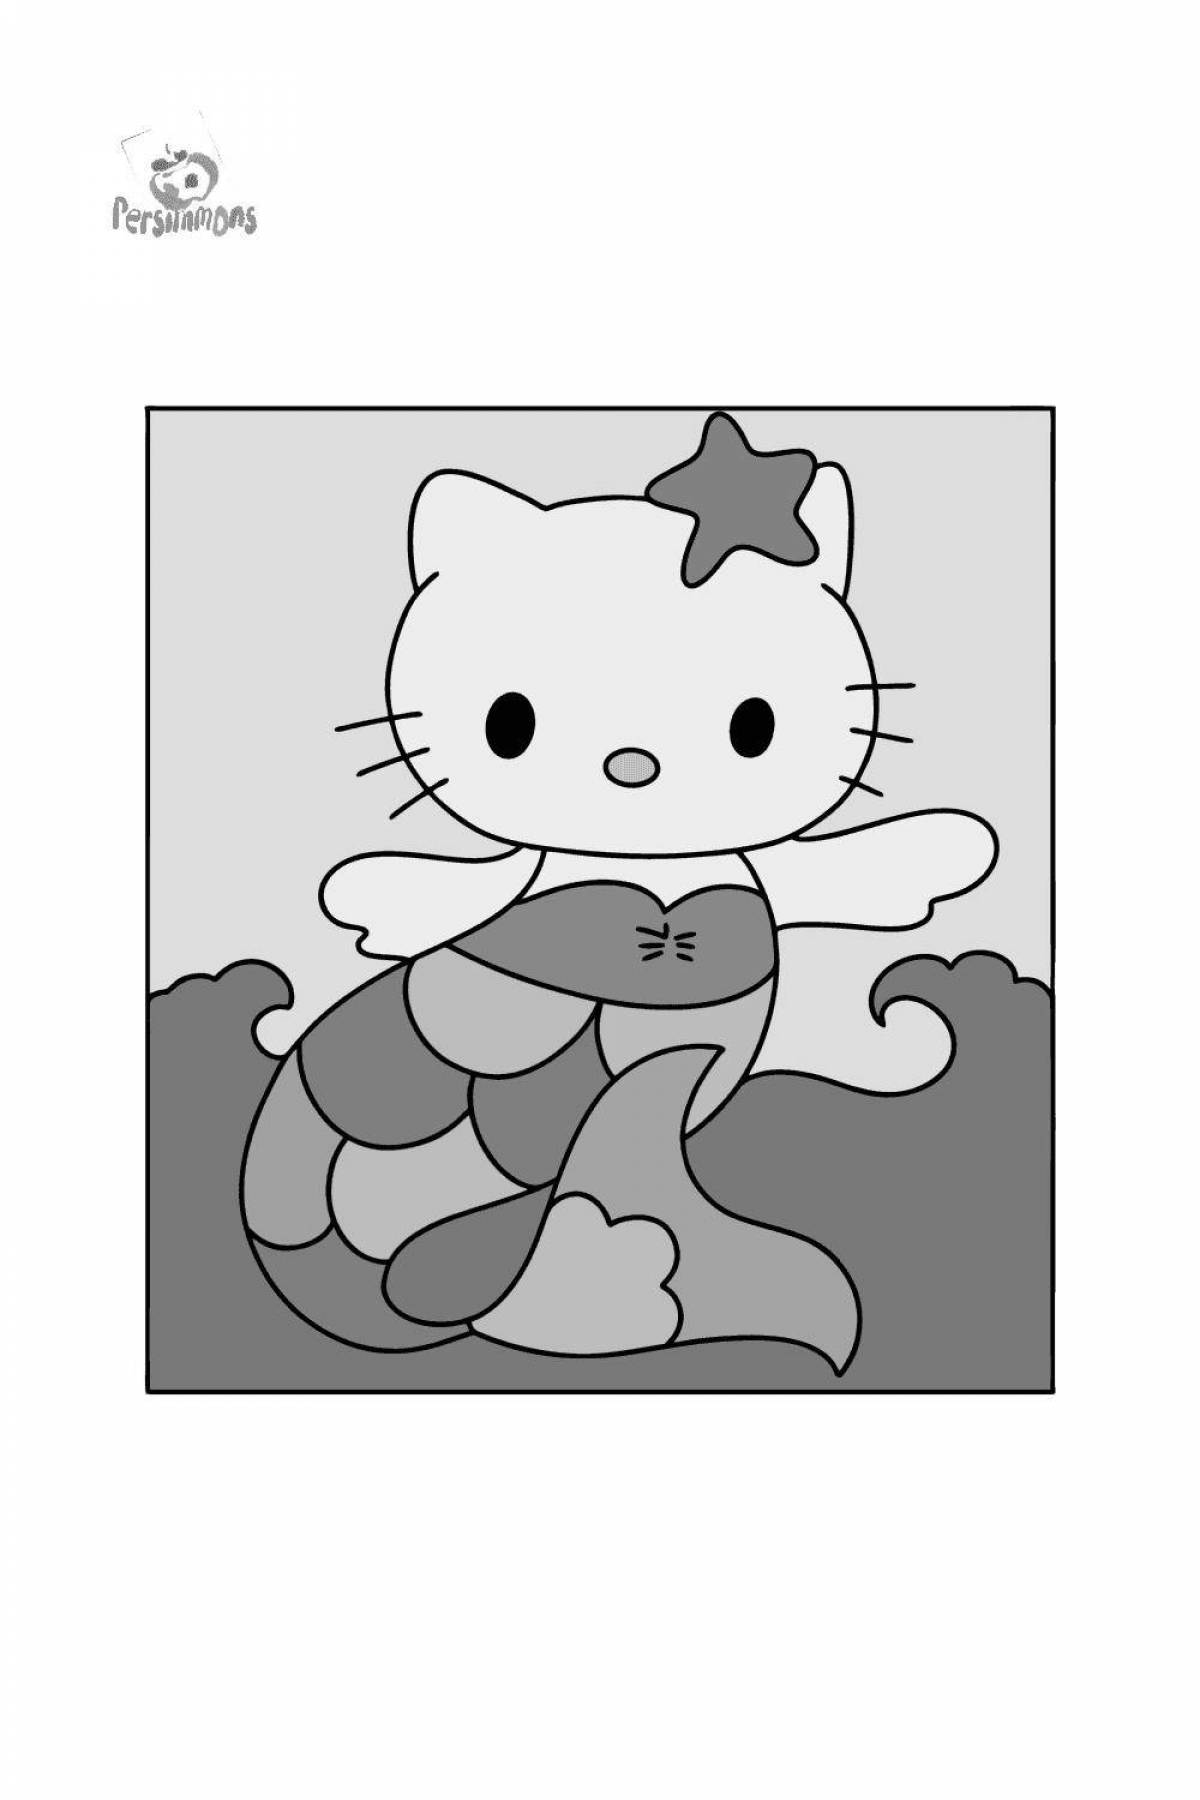 Dazzling hello kitty mermaid coloring page